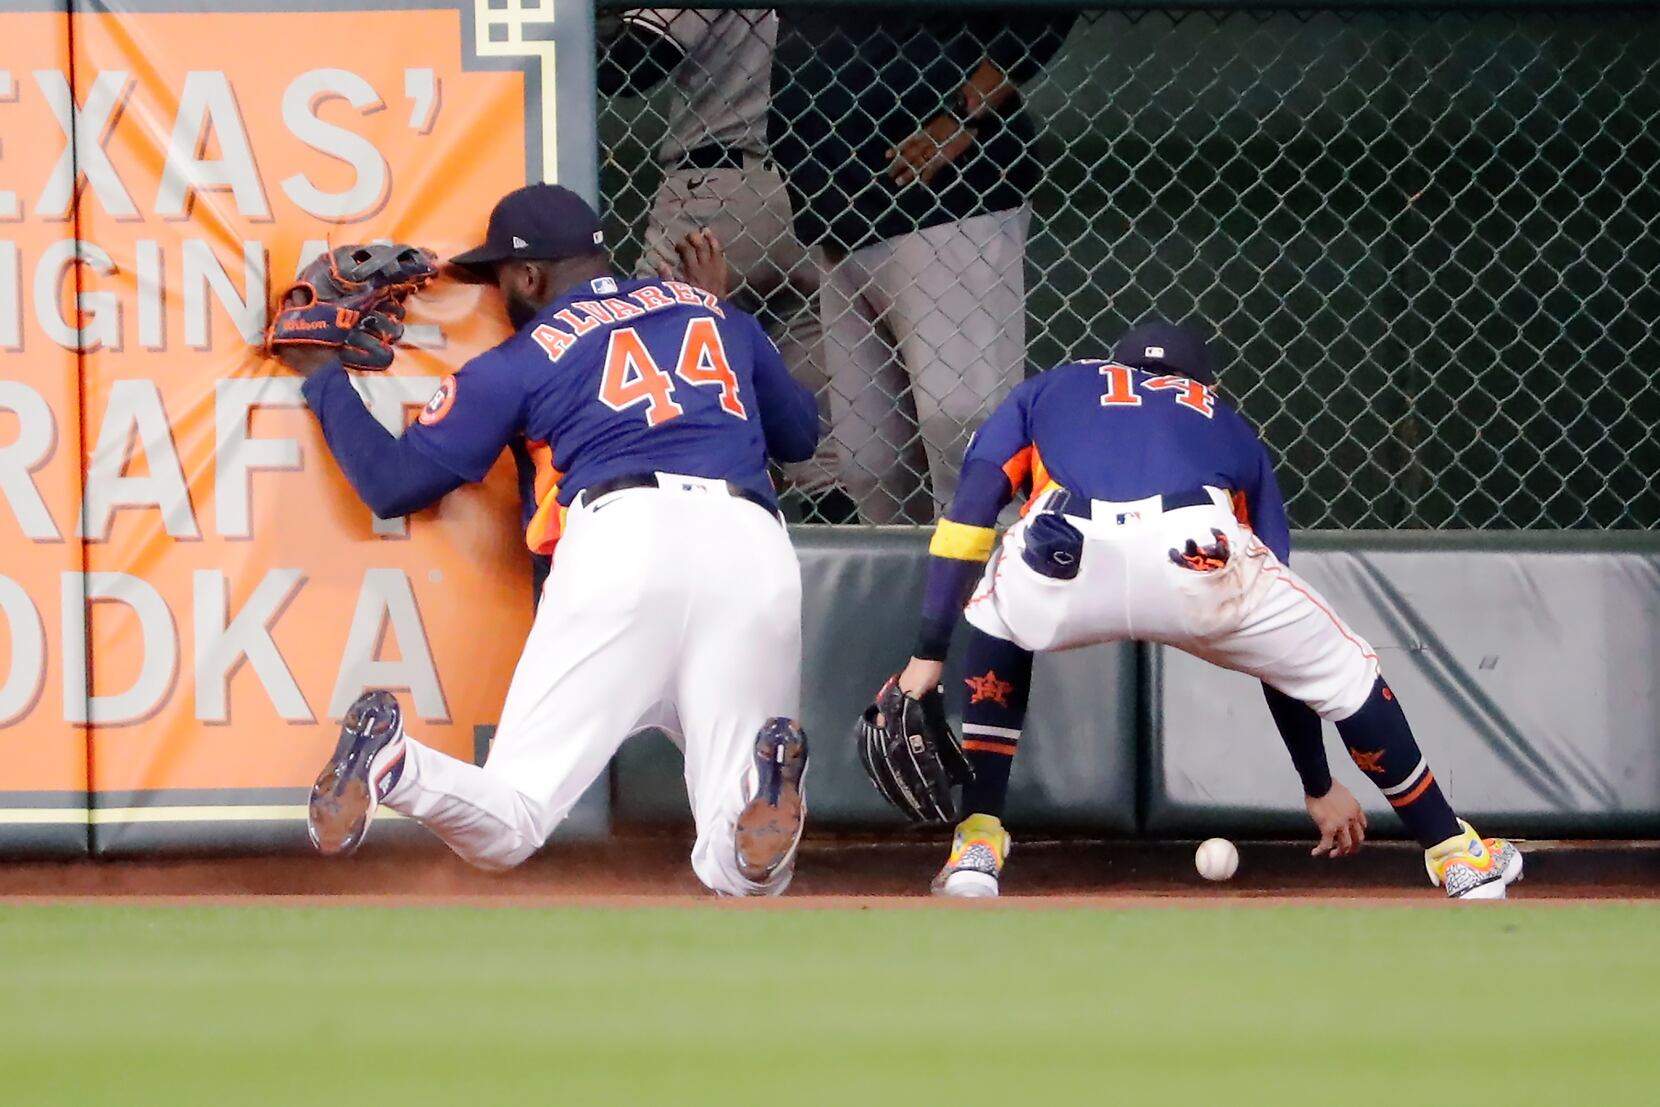 Yankees end first half with loss on Altuve walkoff